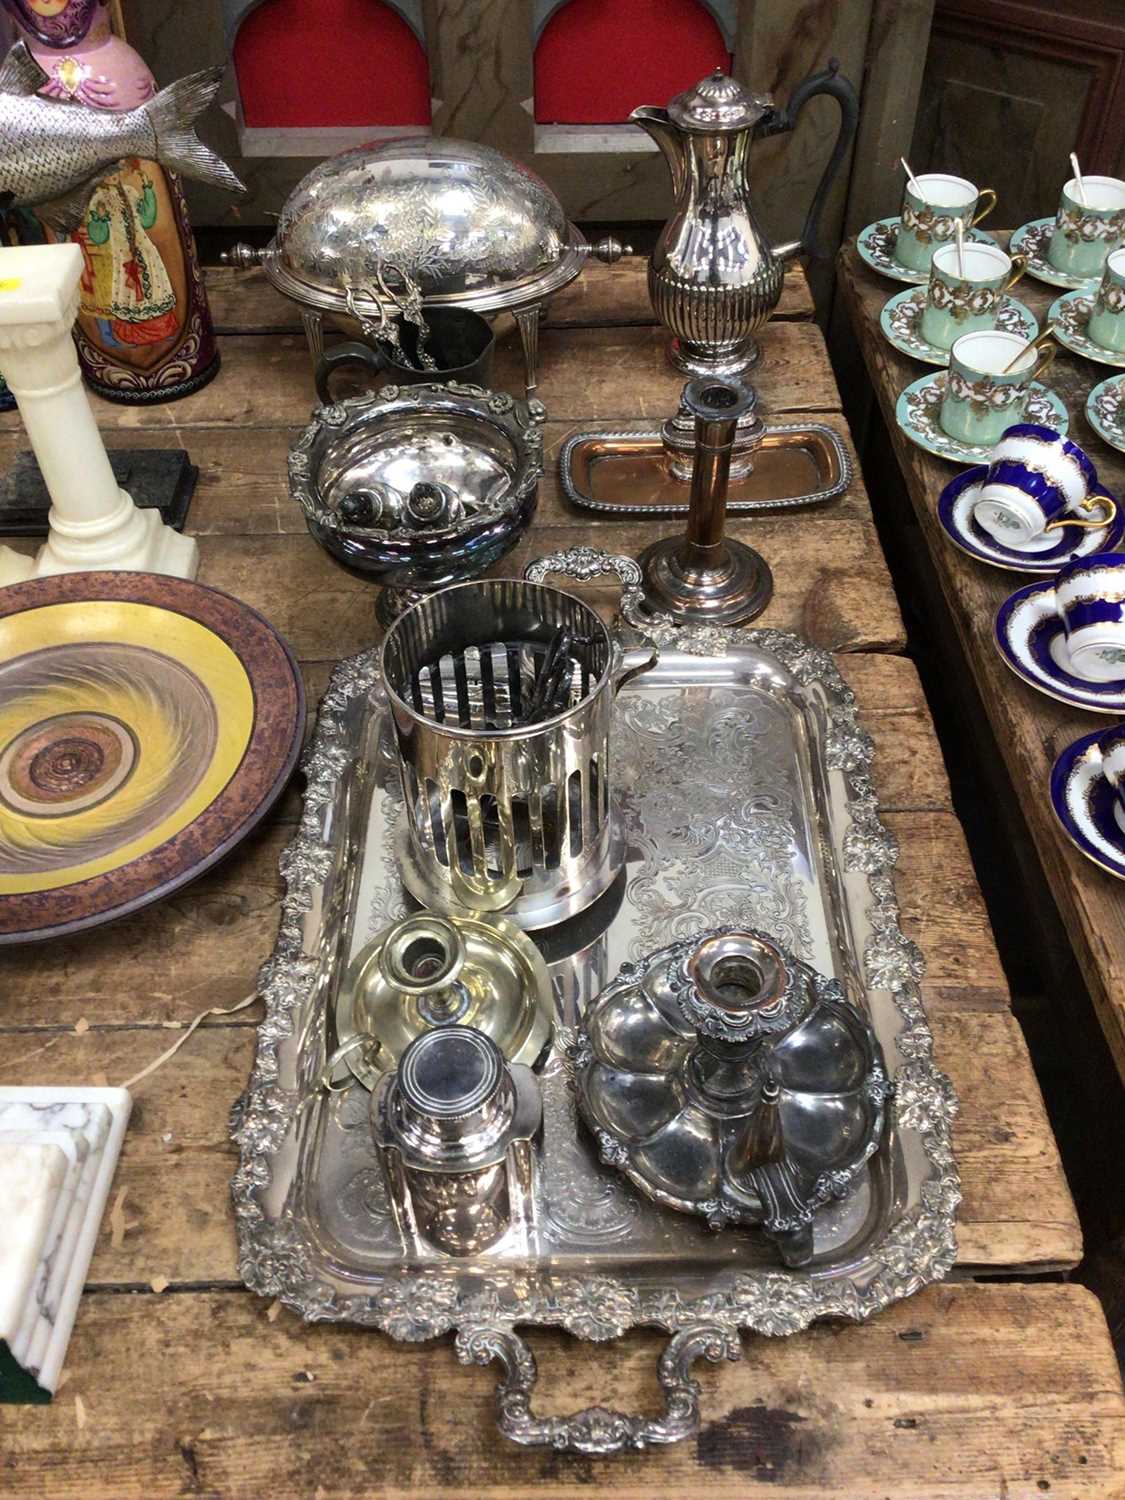 Lot 23 - Collection of silver plate, including a revolving entrée dish, tray, coffee pot, etc